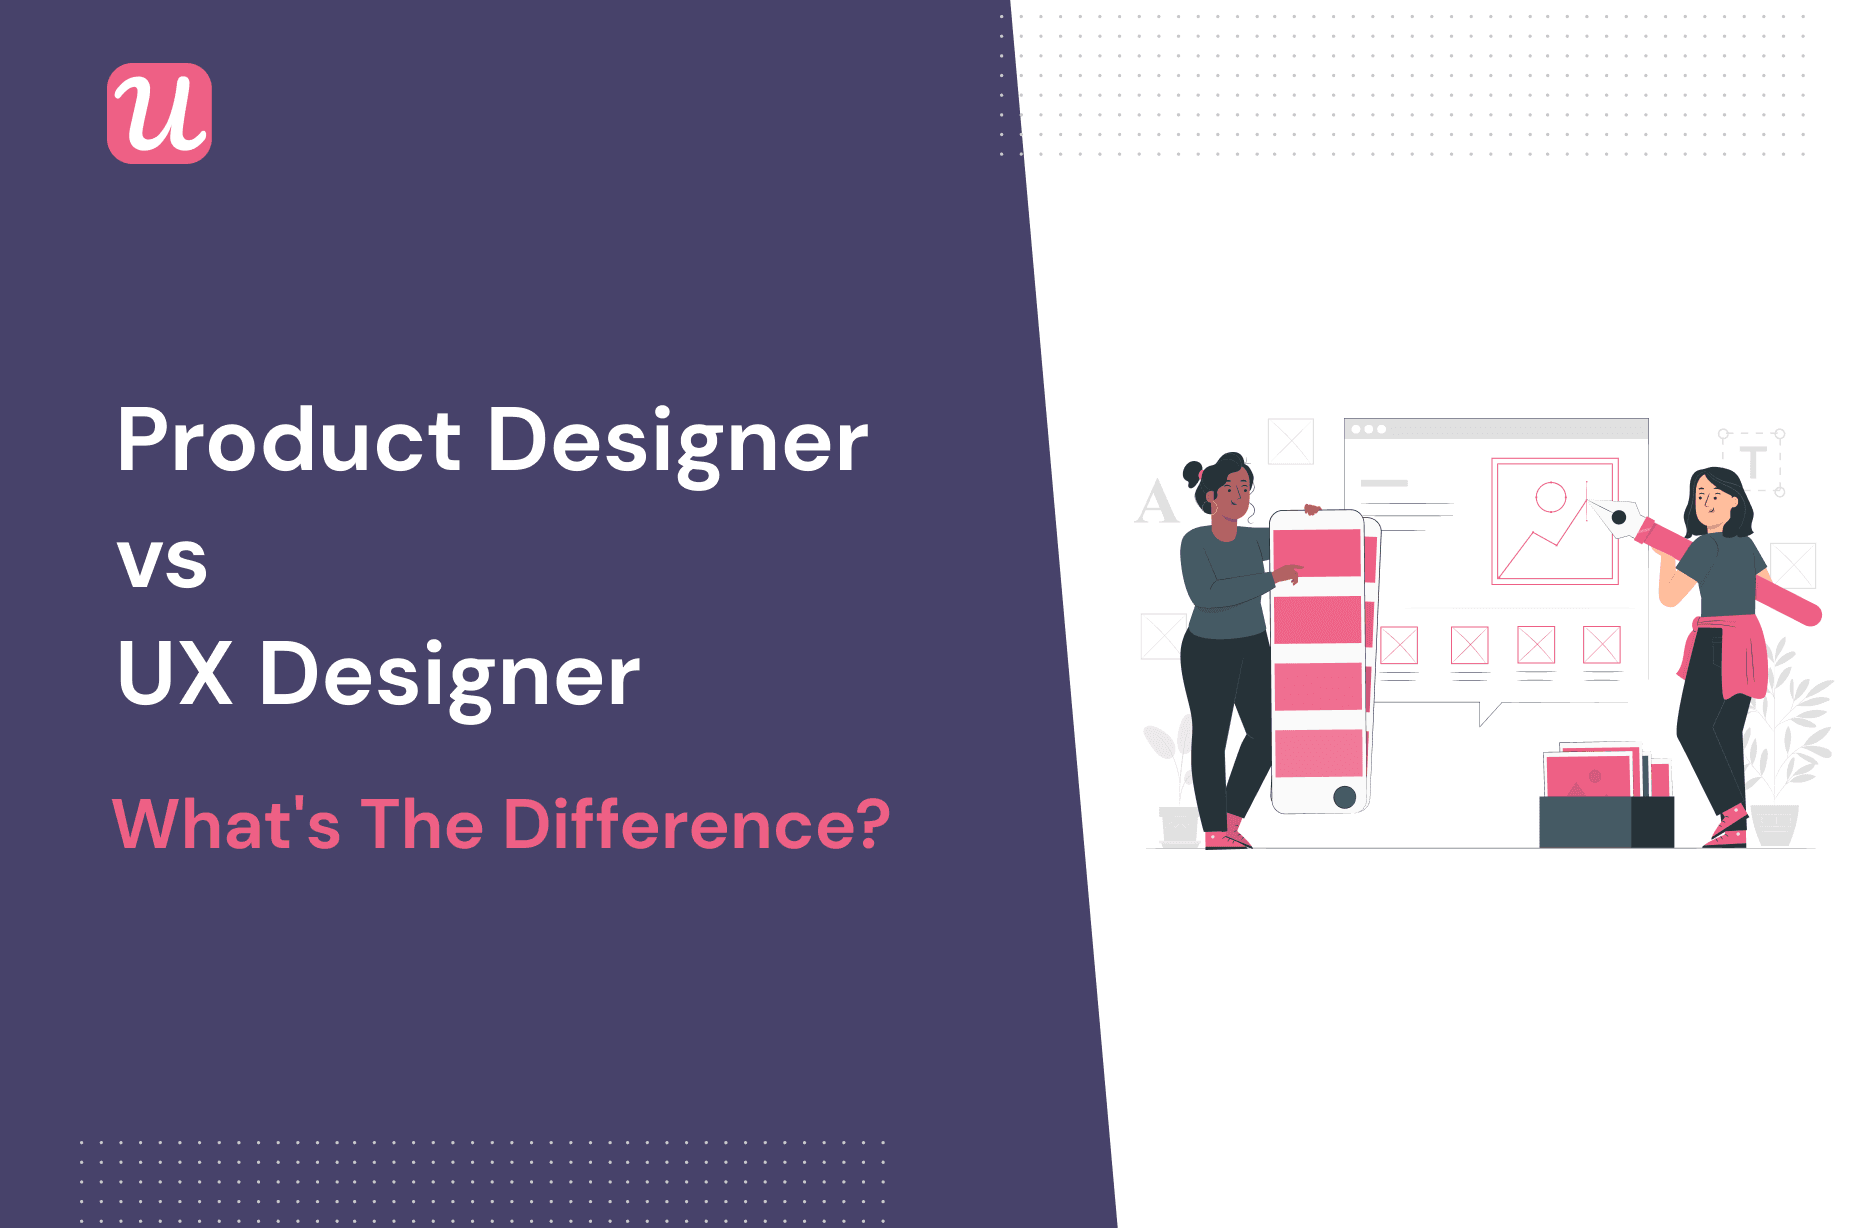 Product designer vs UX designer - what's the difference?